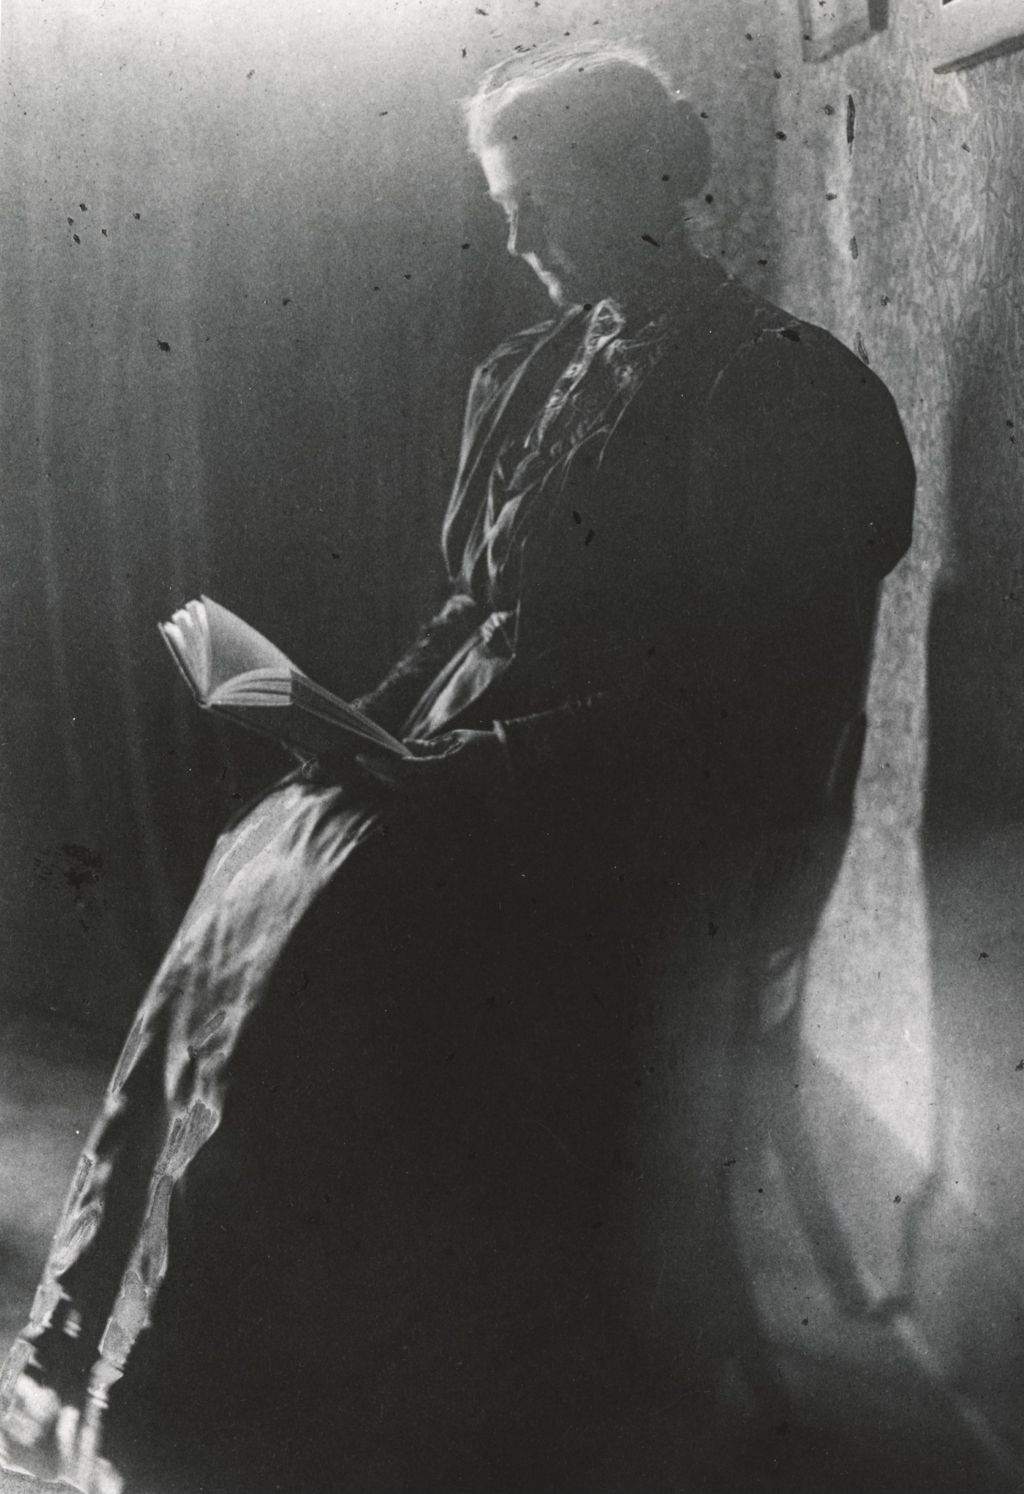 Portrait of Jane Addams reading a book